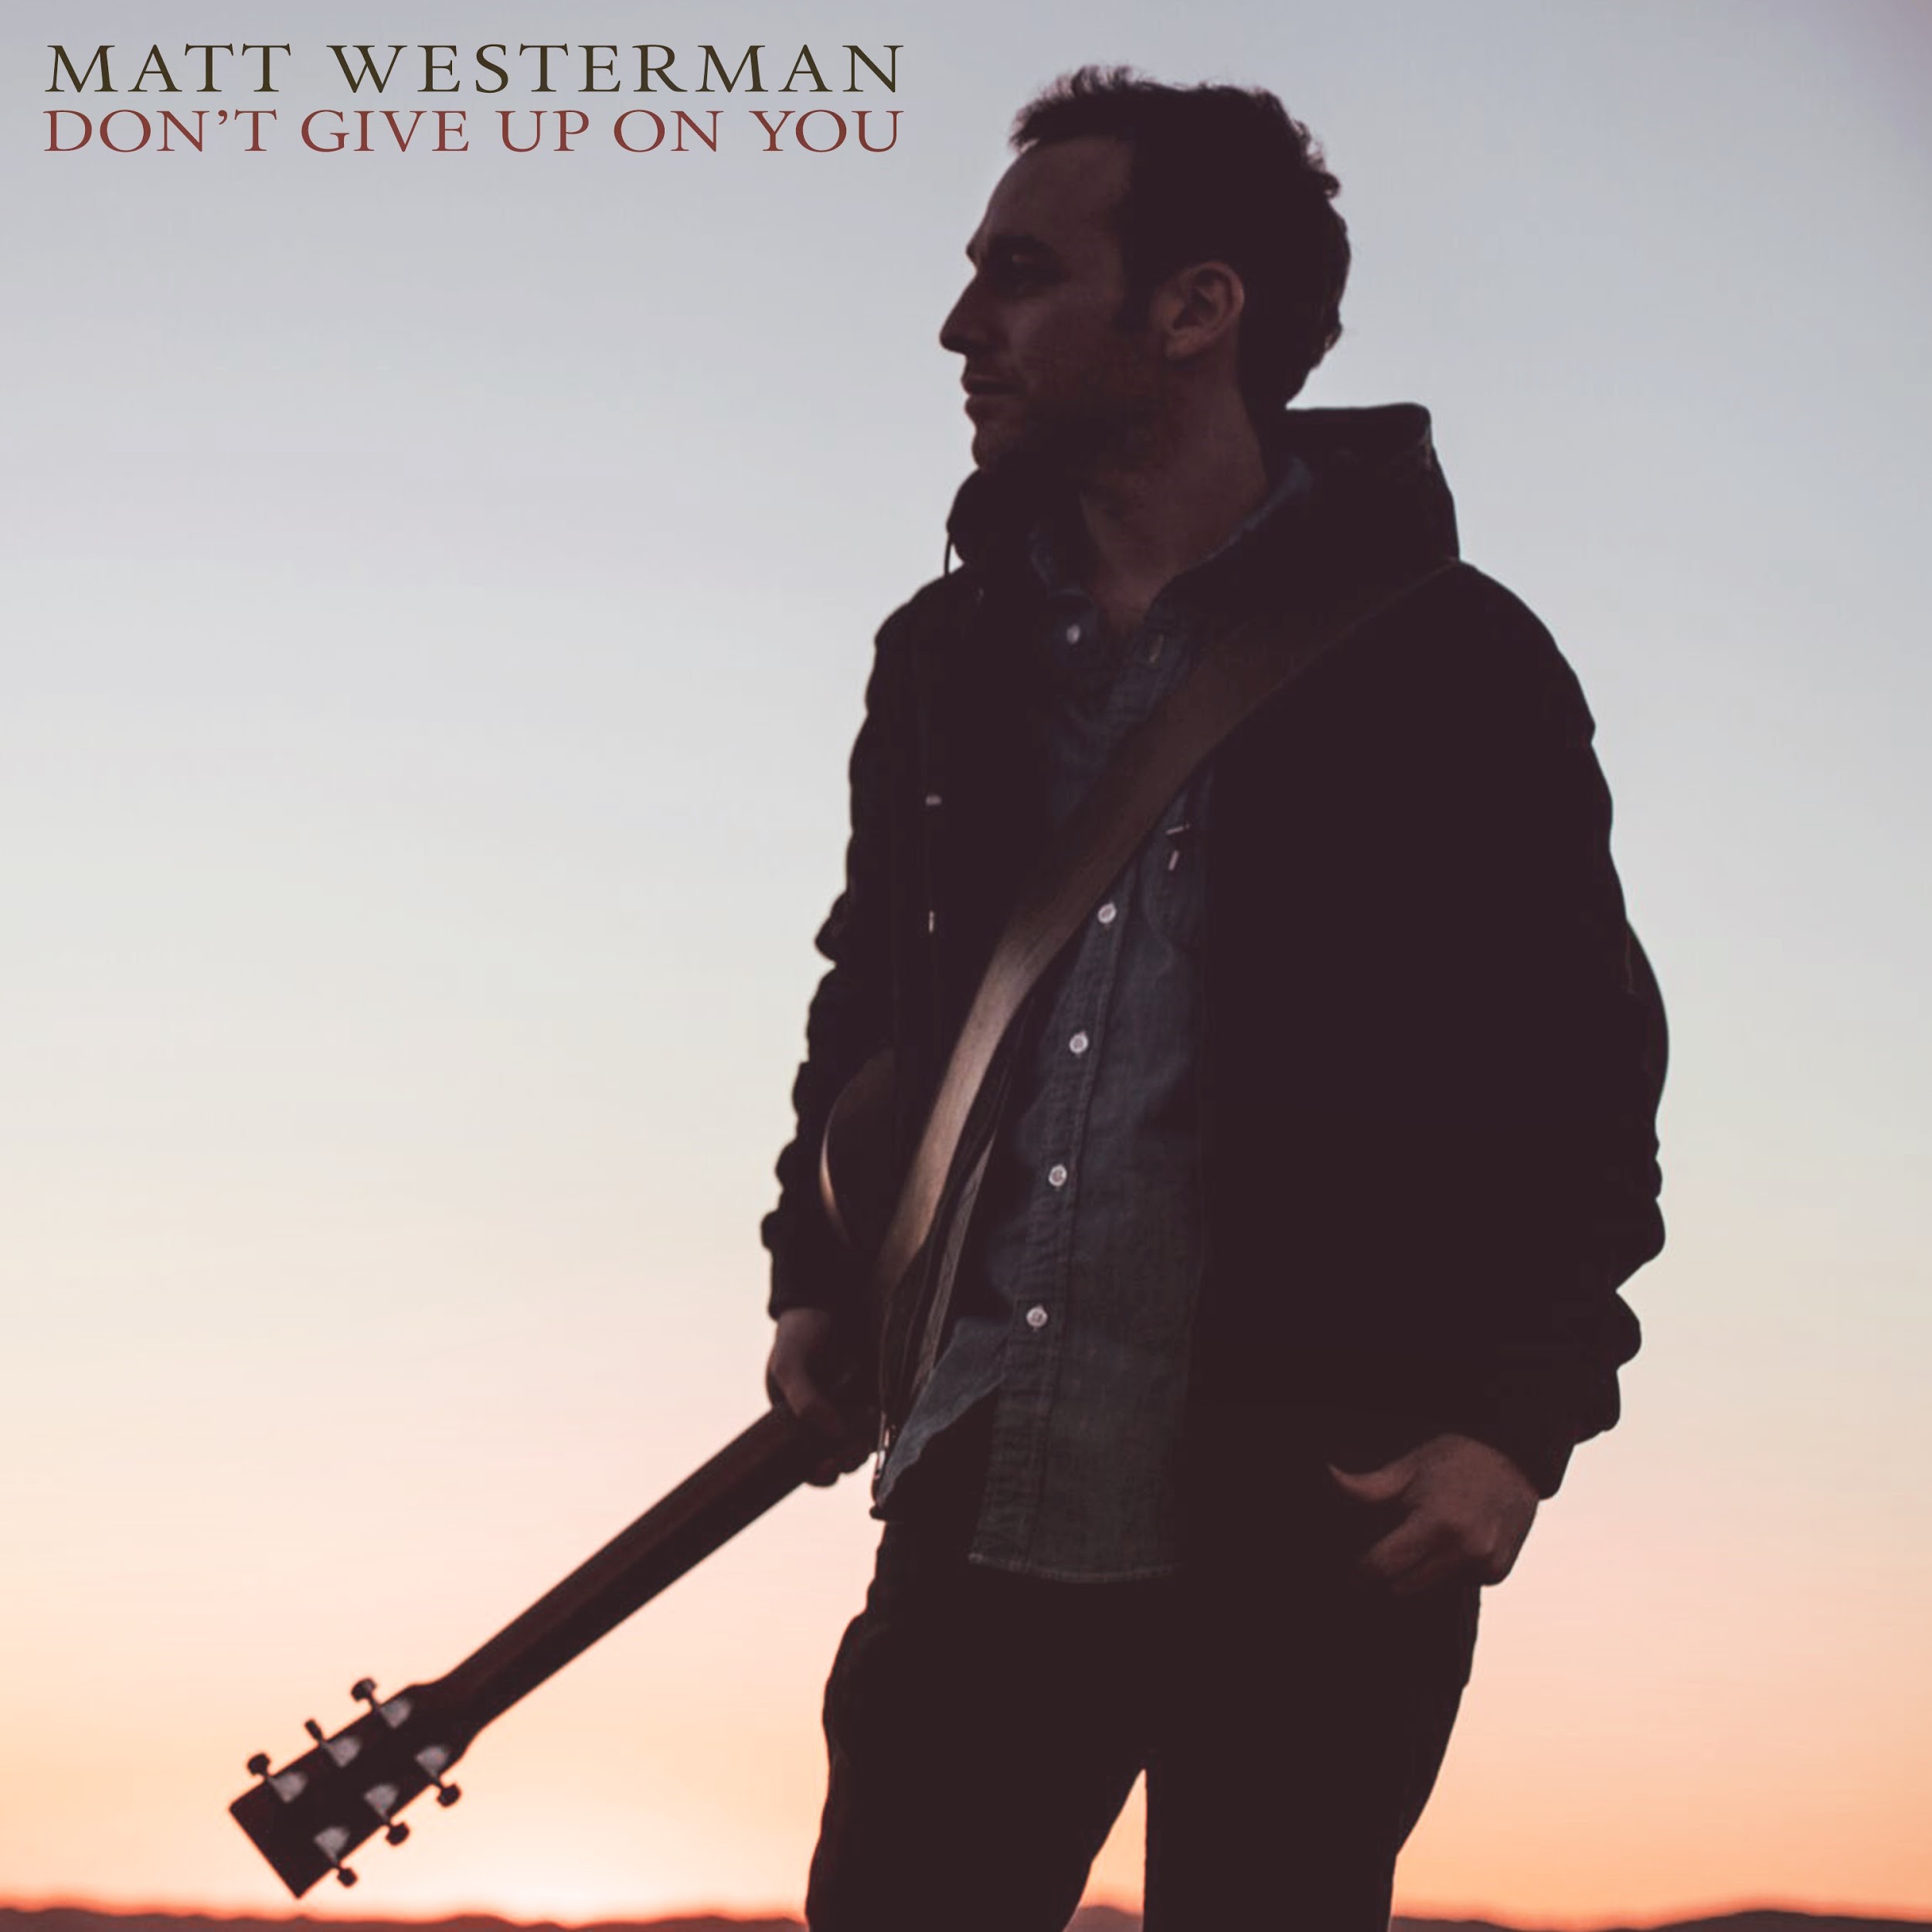 Matt Westerman releases new single "Don't Give Up On You"